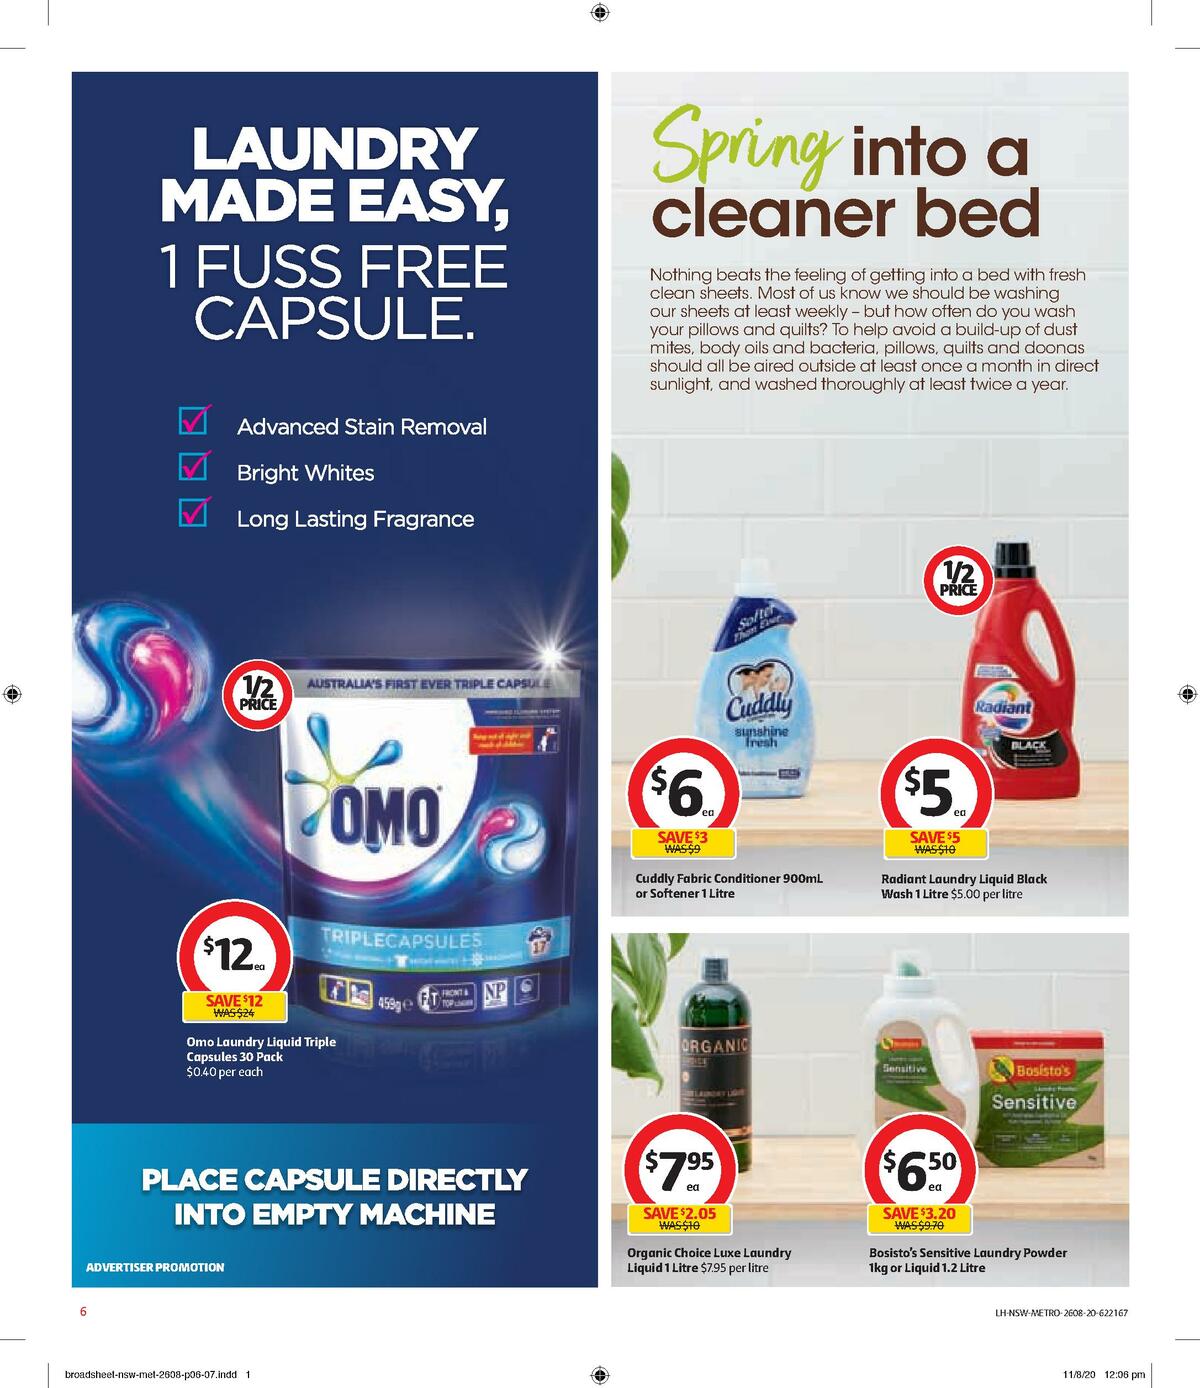 Coles Spring Cleaning Guide Catalogues from 26 August